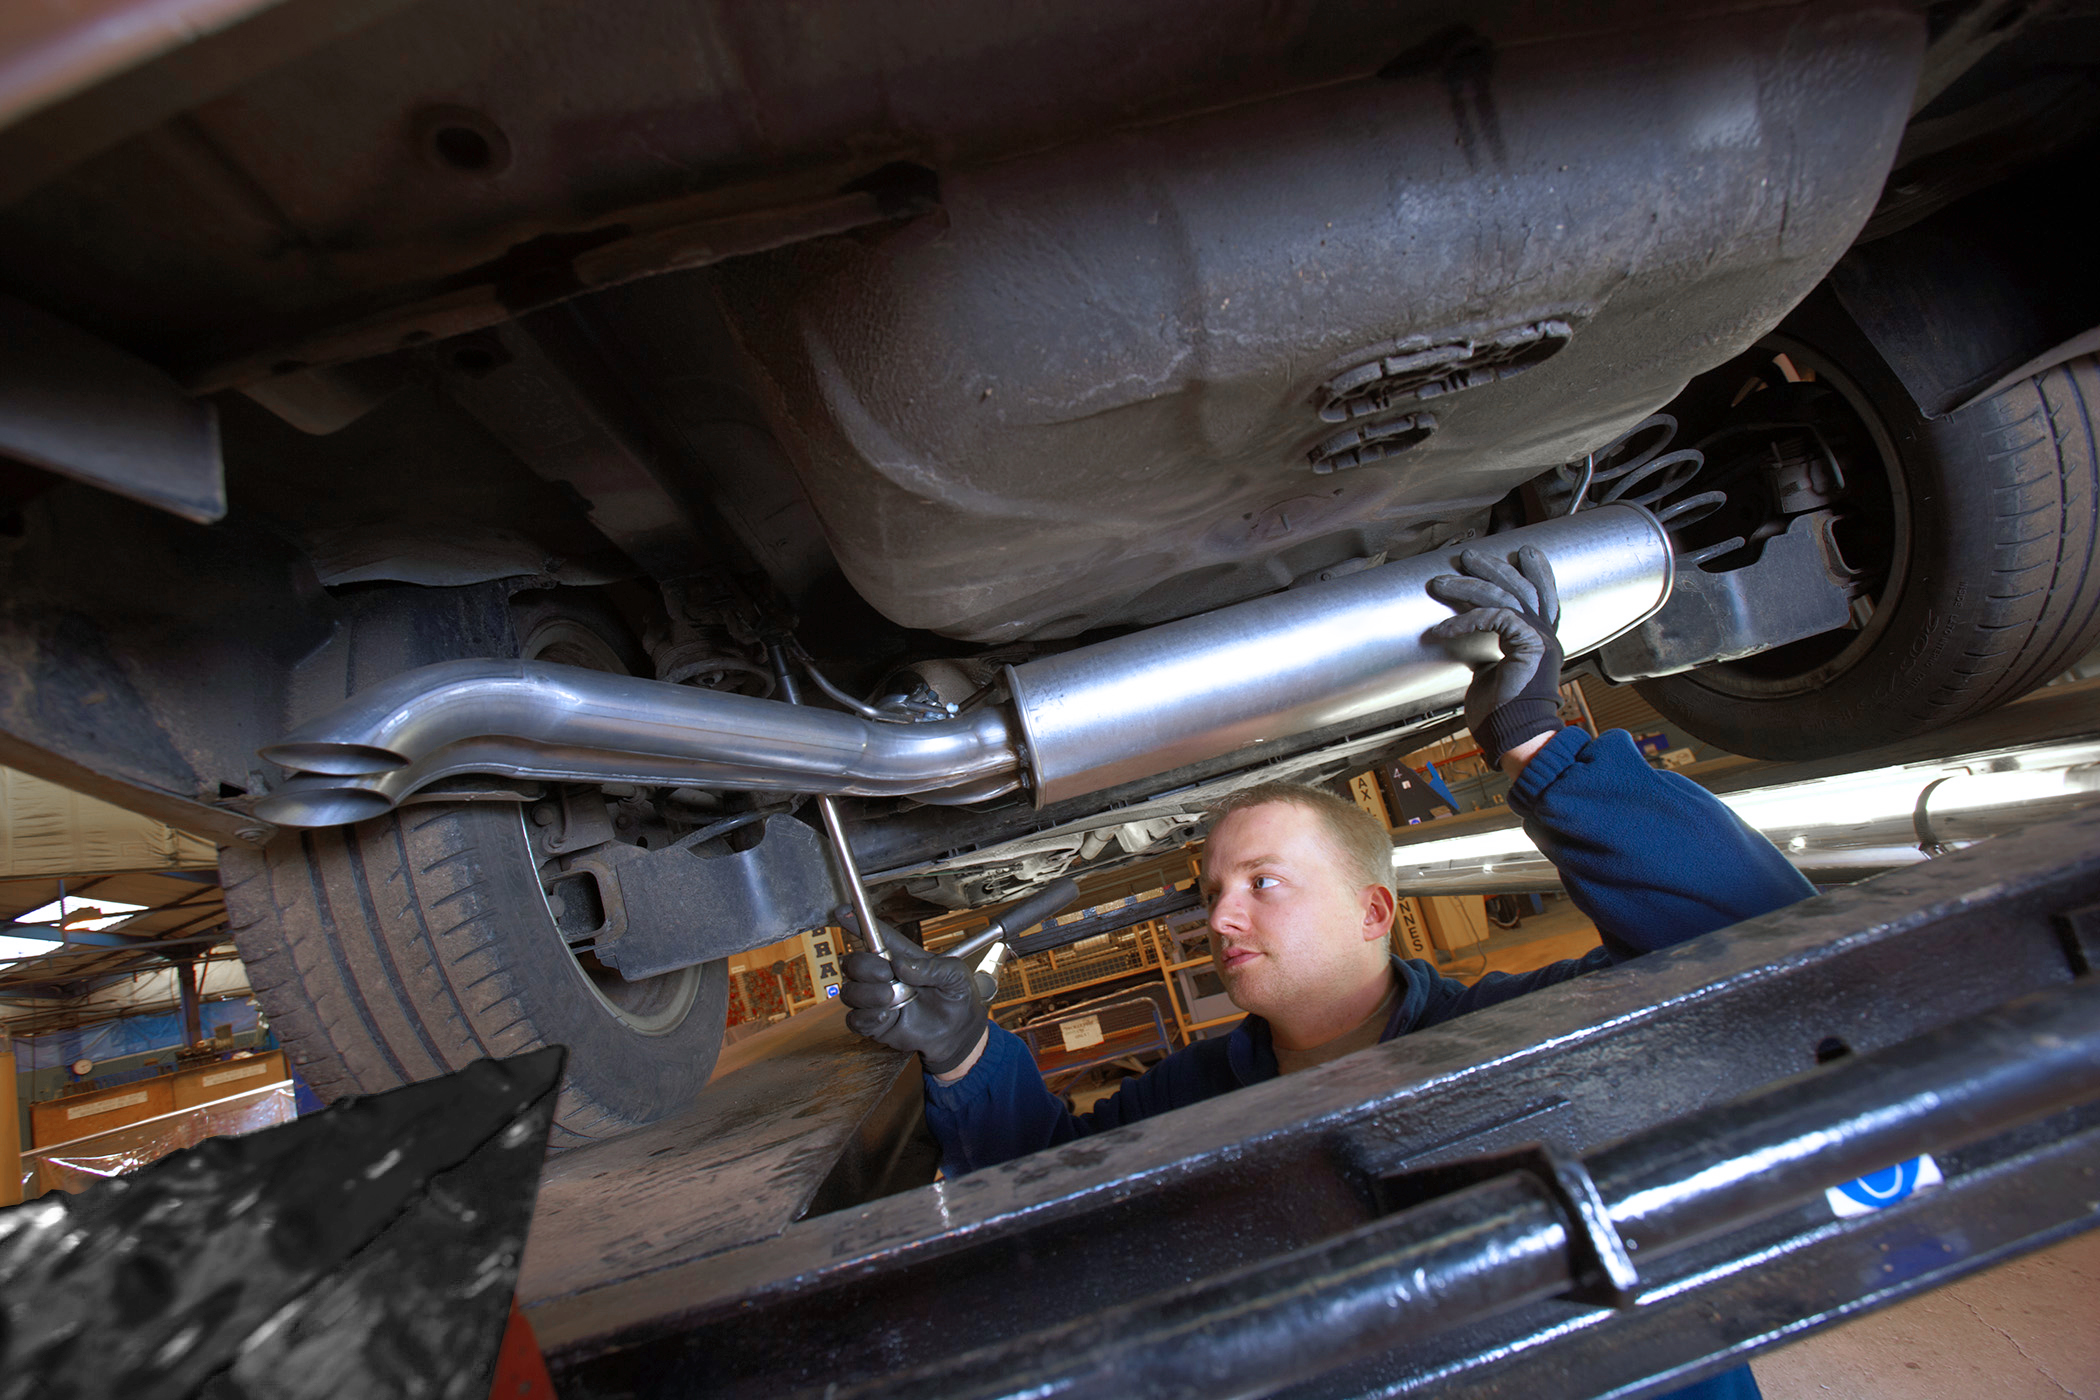 Spotting and fixing worn mountings early can save motorists from a more expensive repair down the line.